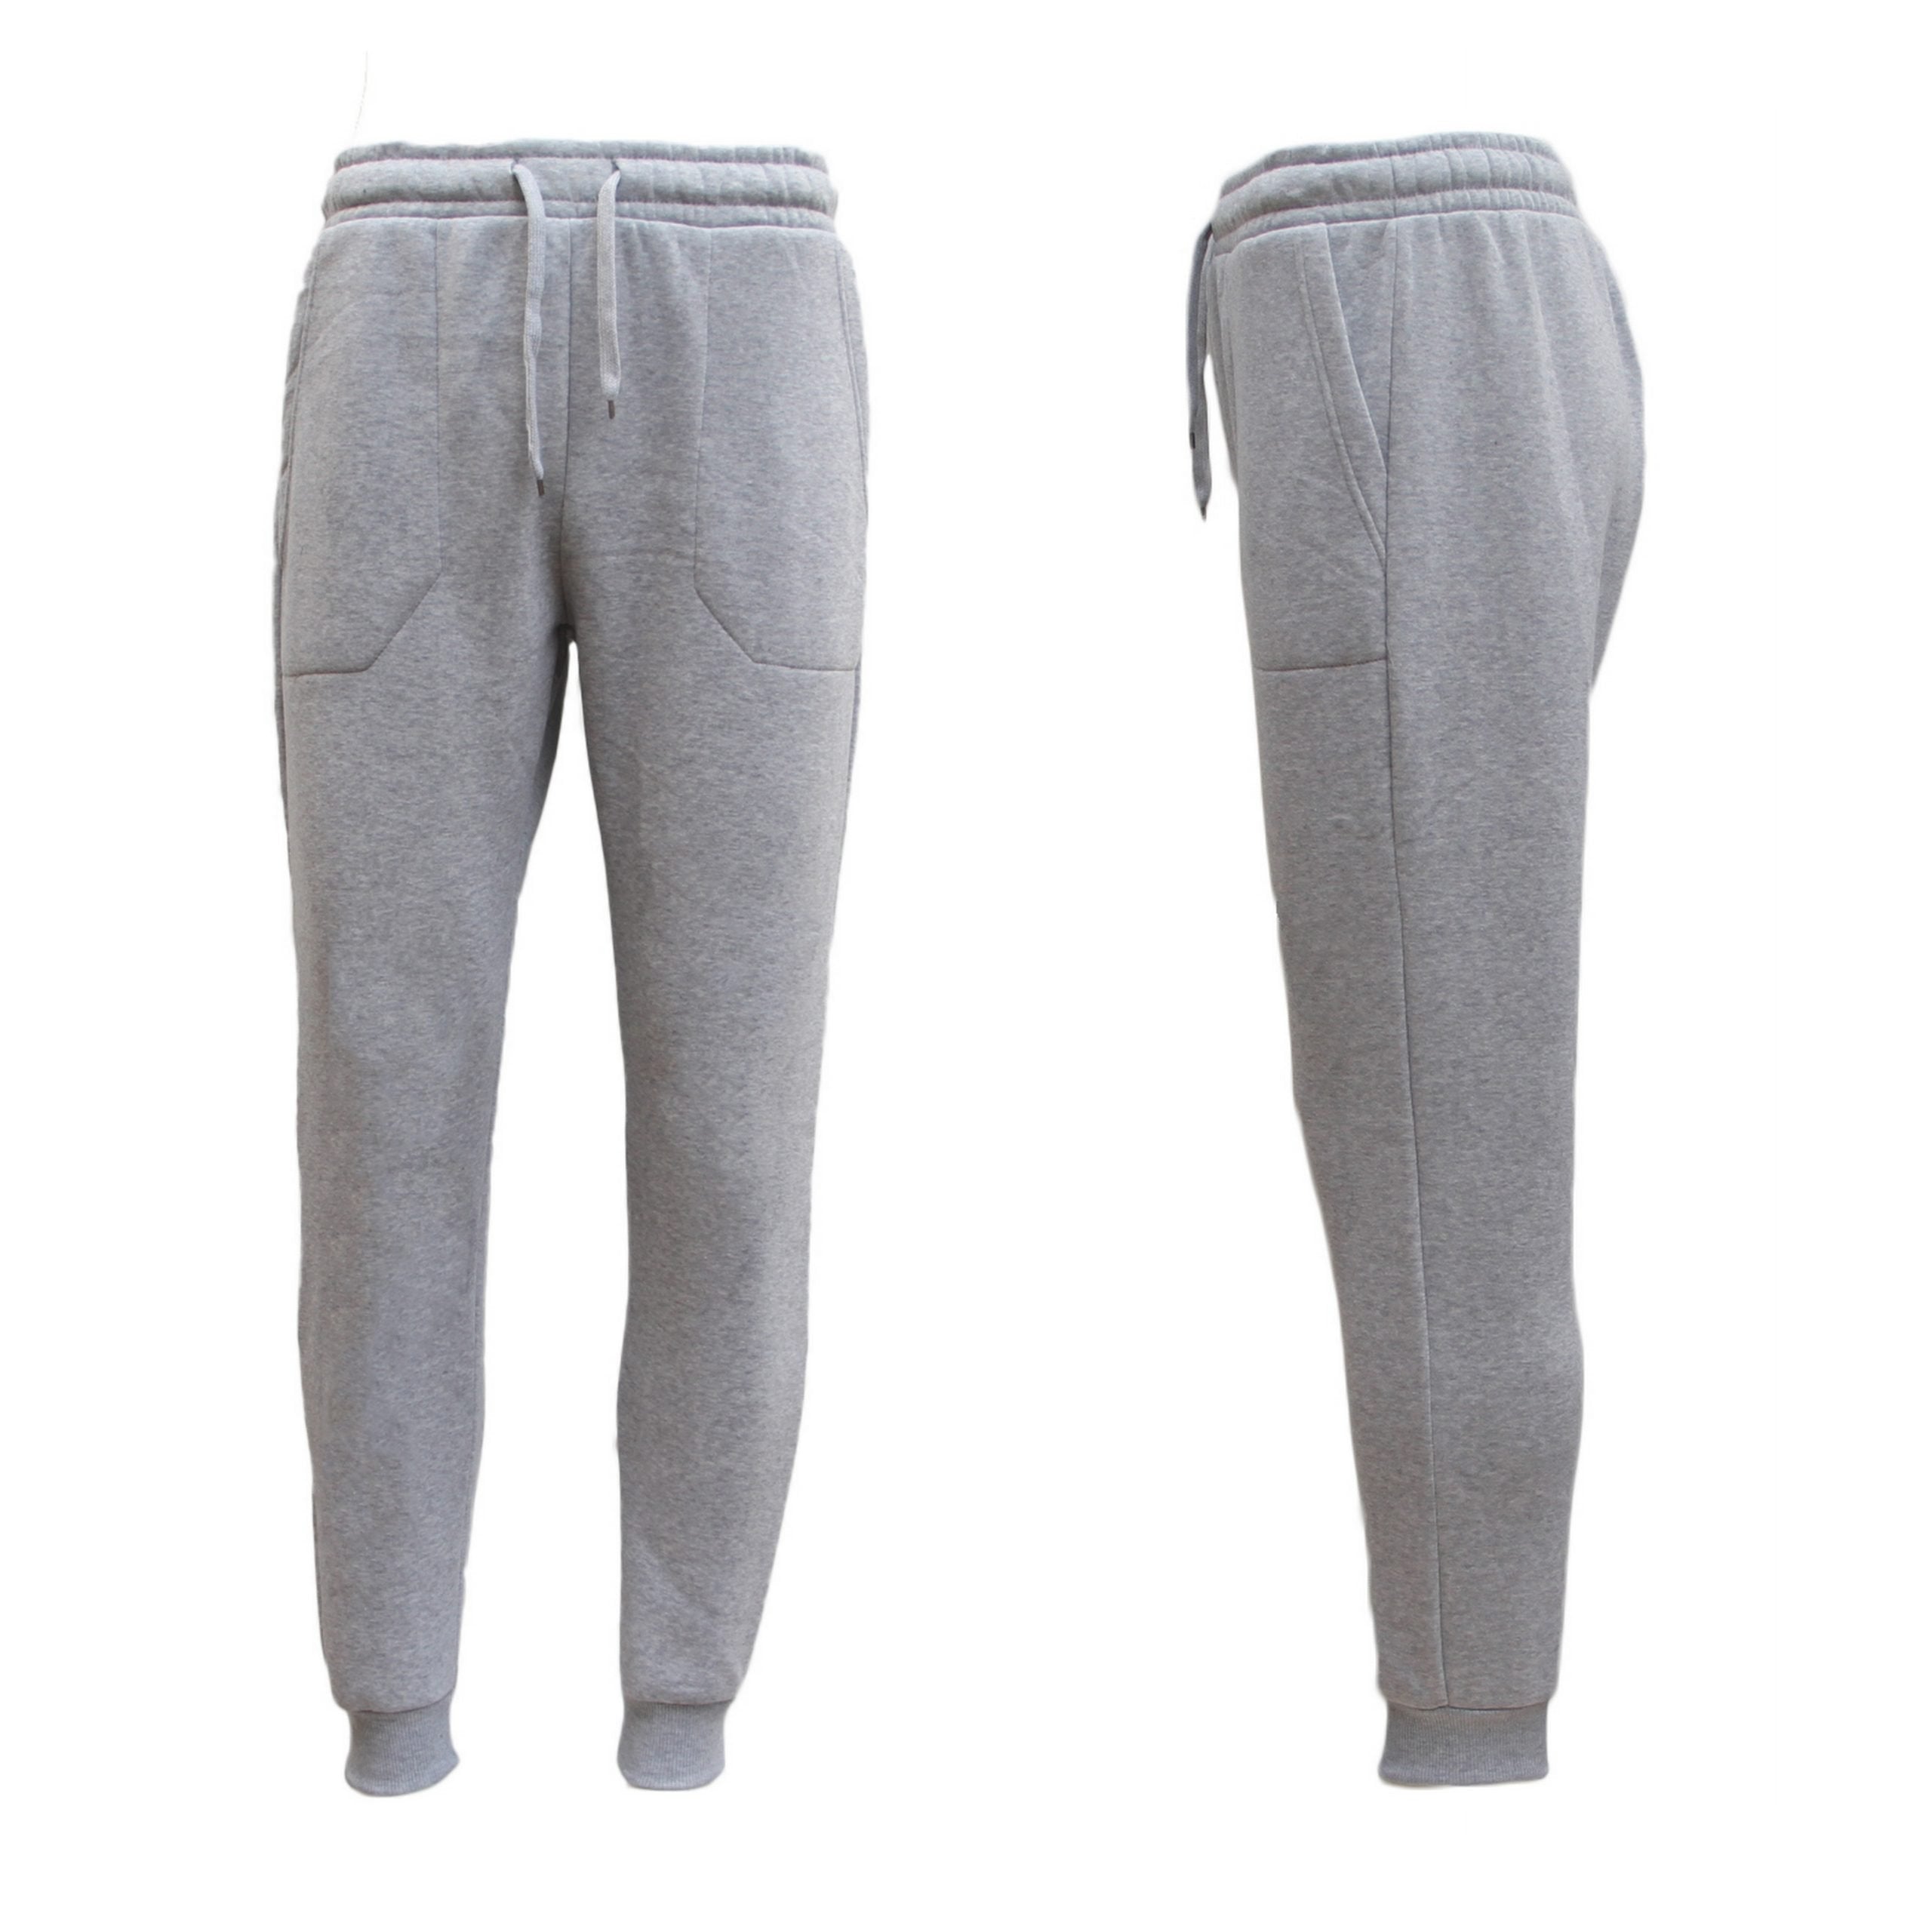 Mens Unisex Fleece Lined Sweat Track Pants Suit Casual Trackies Slim Cuff XS-6XL, Light Grey, S